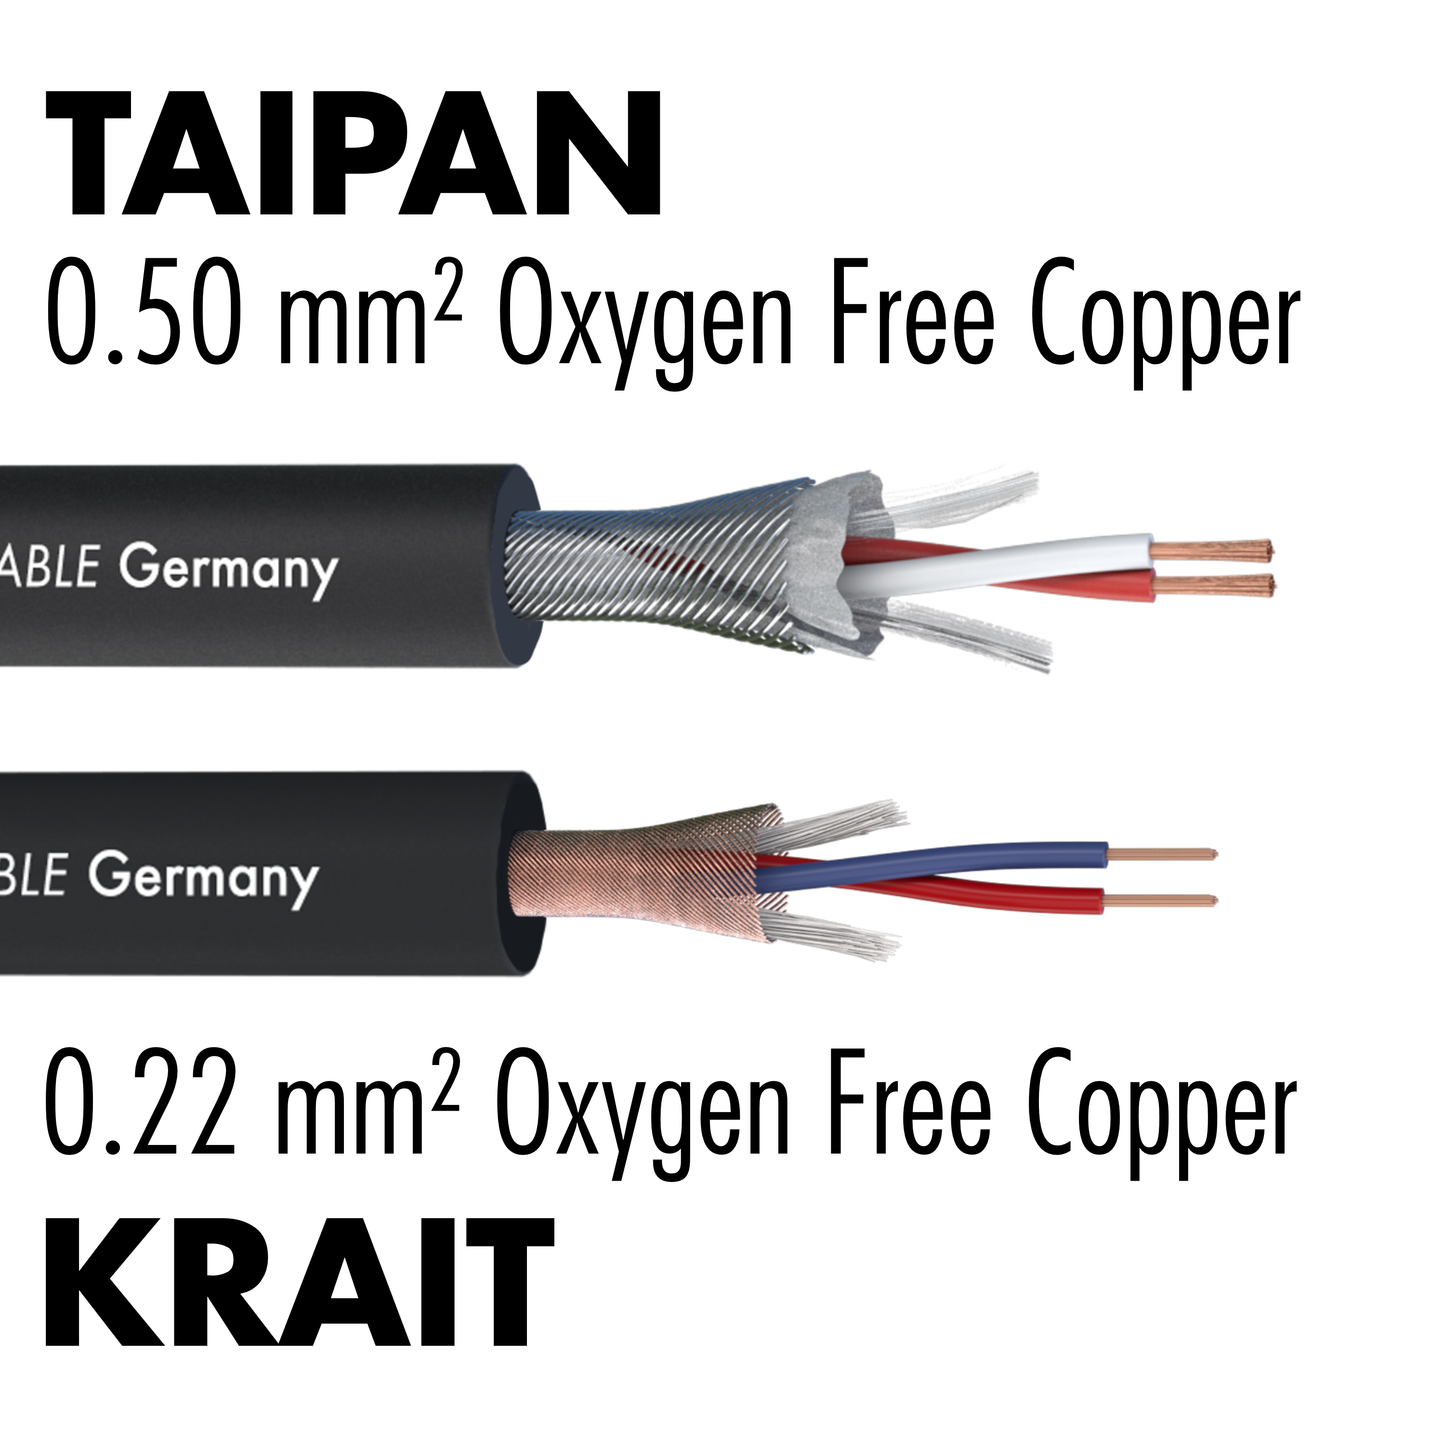 Pair of Taipan RCA Cables (6 in - 25 ft)